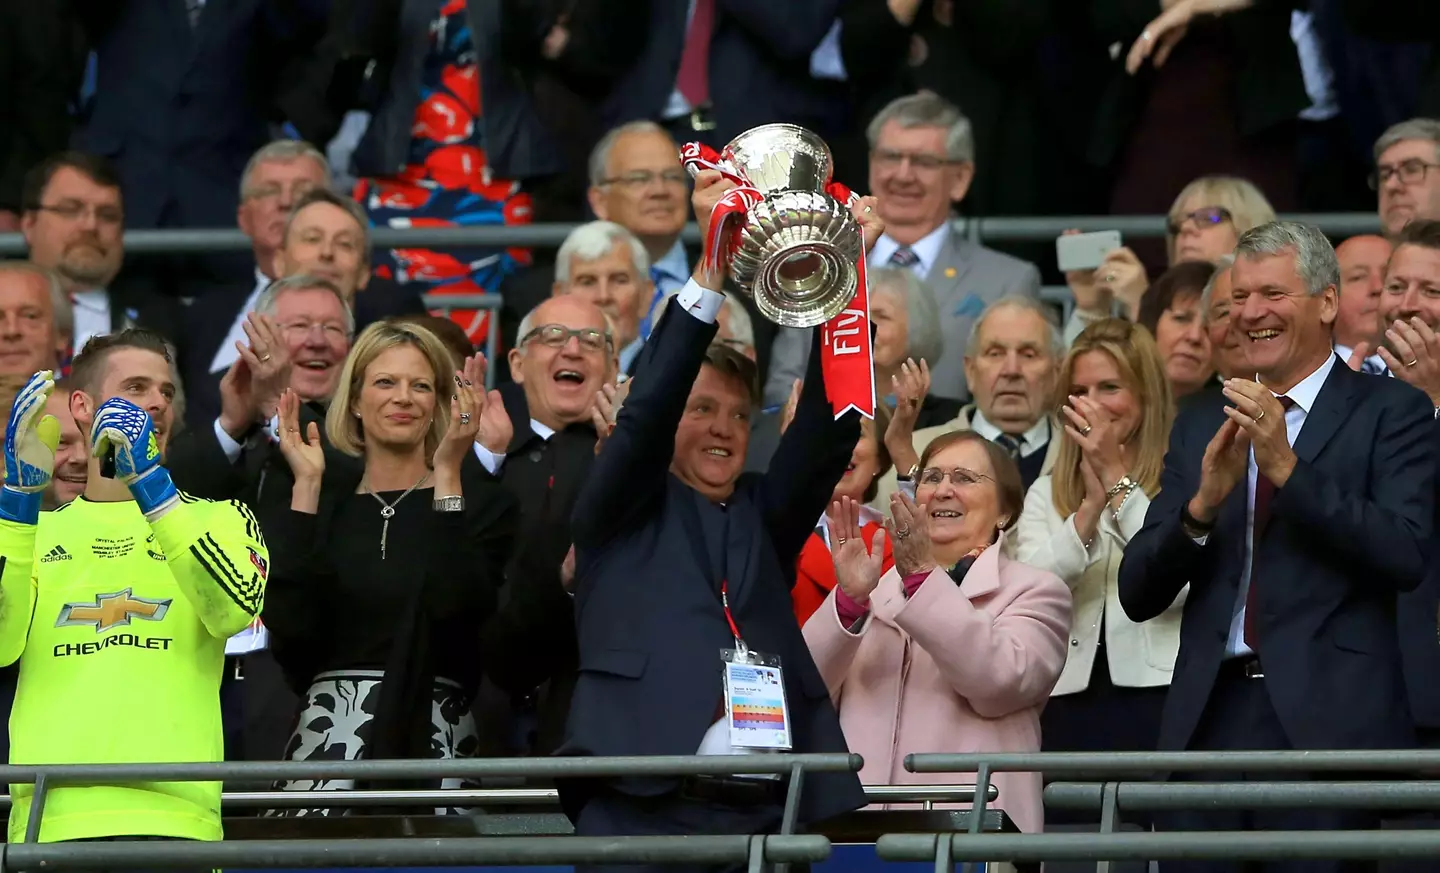 Louis van Gaal is the last manager to win the FA Cup with Manchester United. (Alamy)